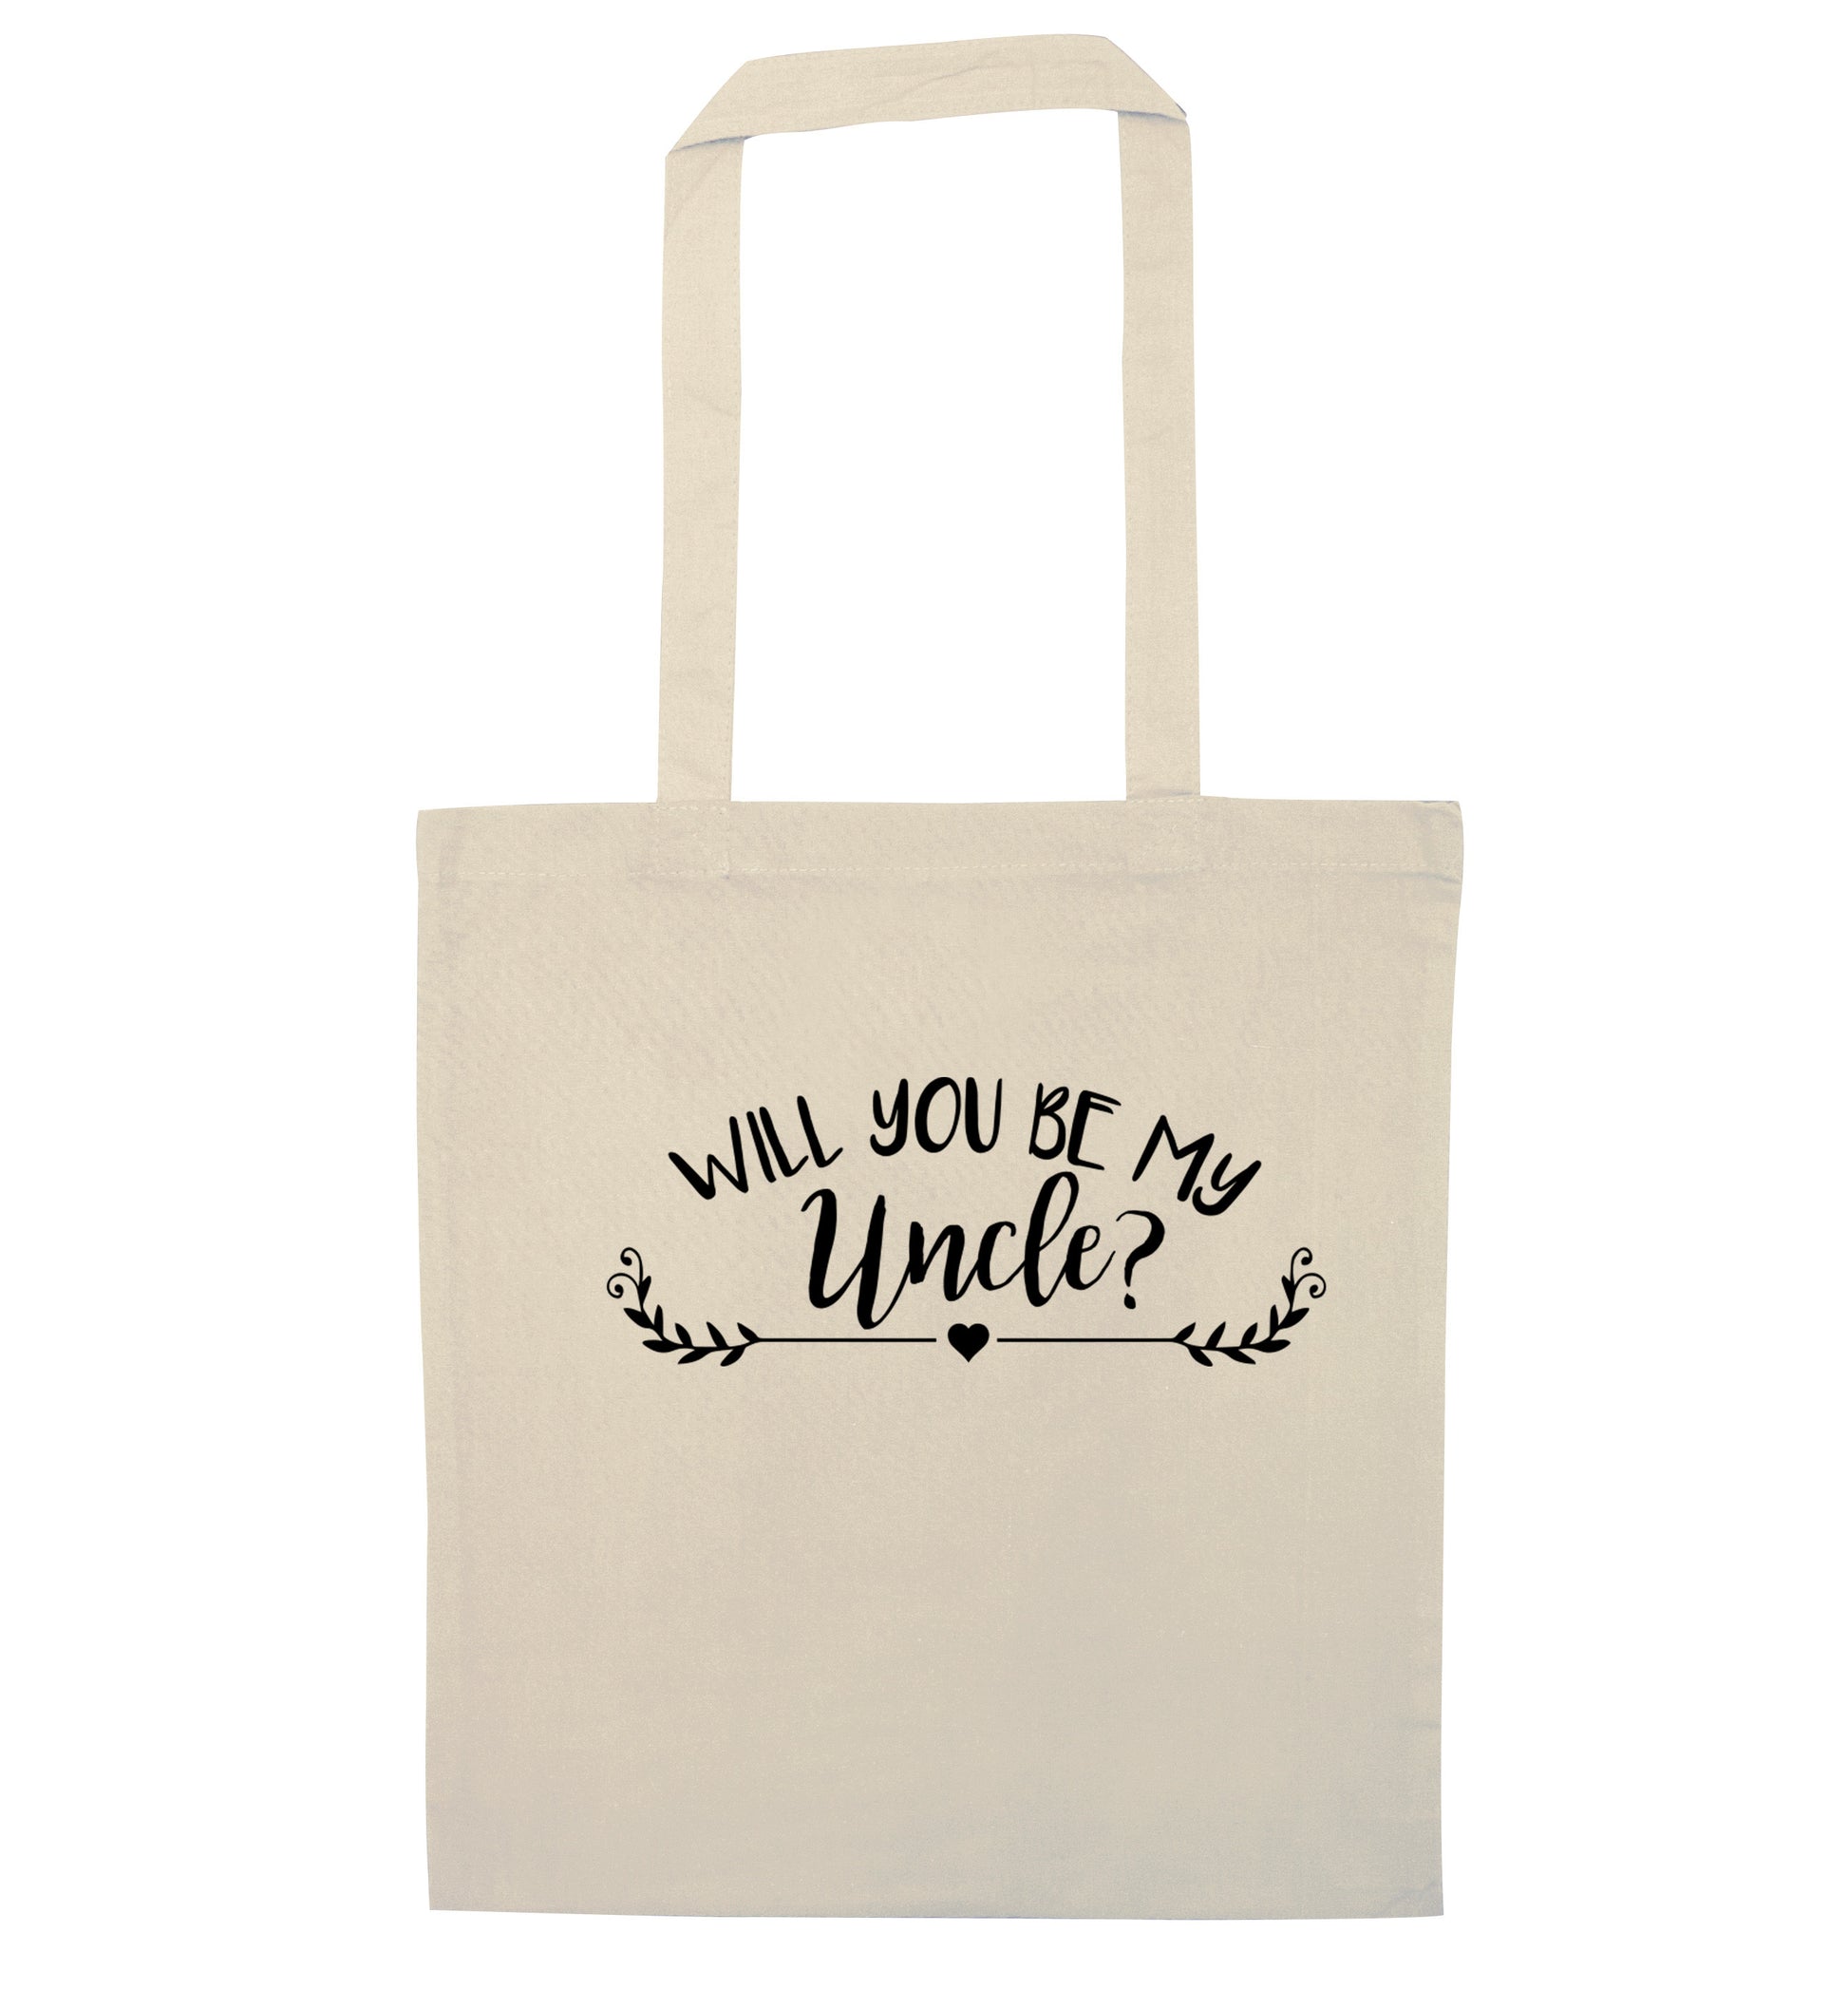 Will you be my uncle? natural tote bag